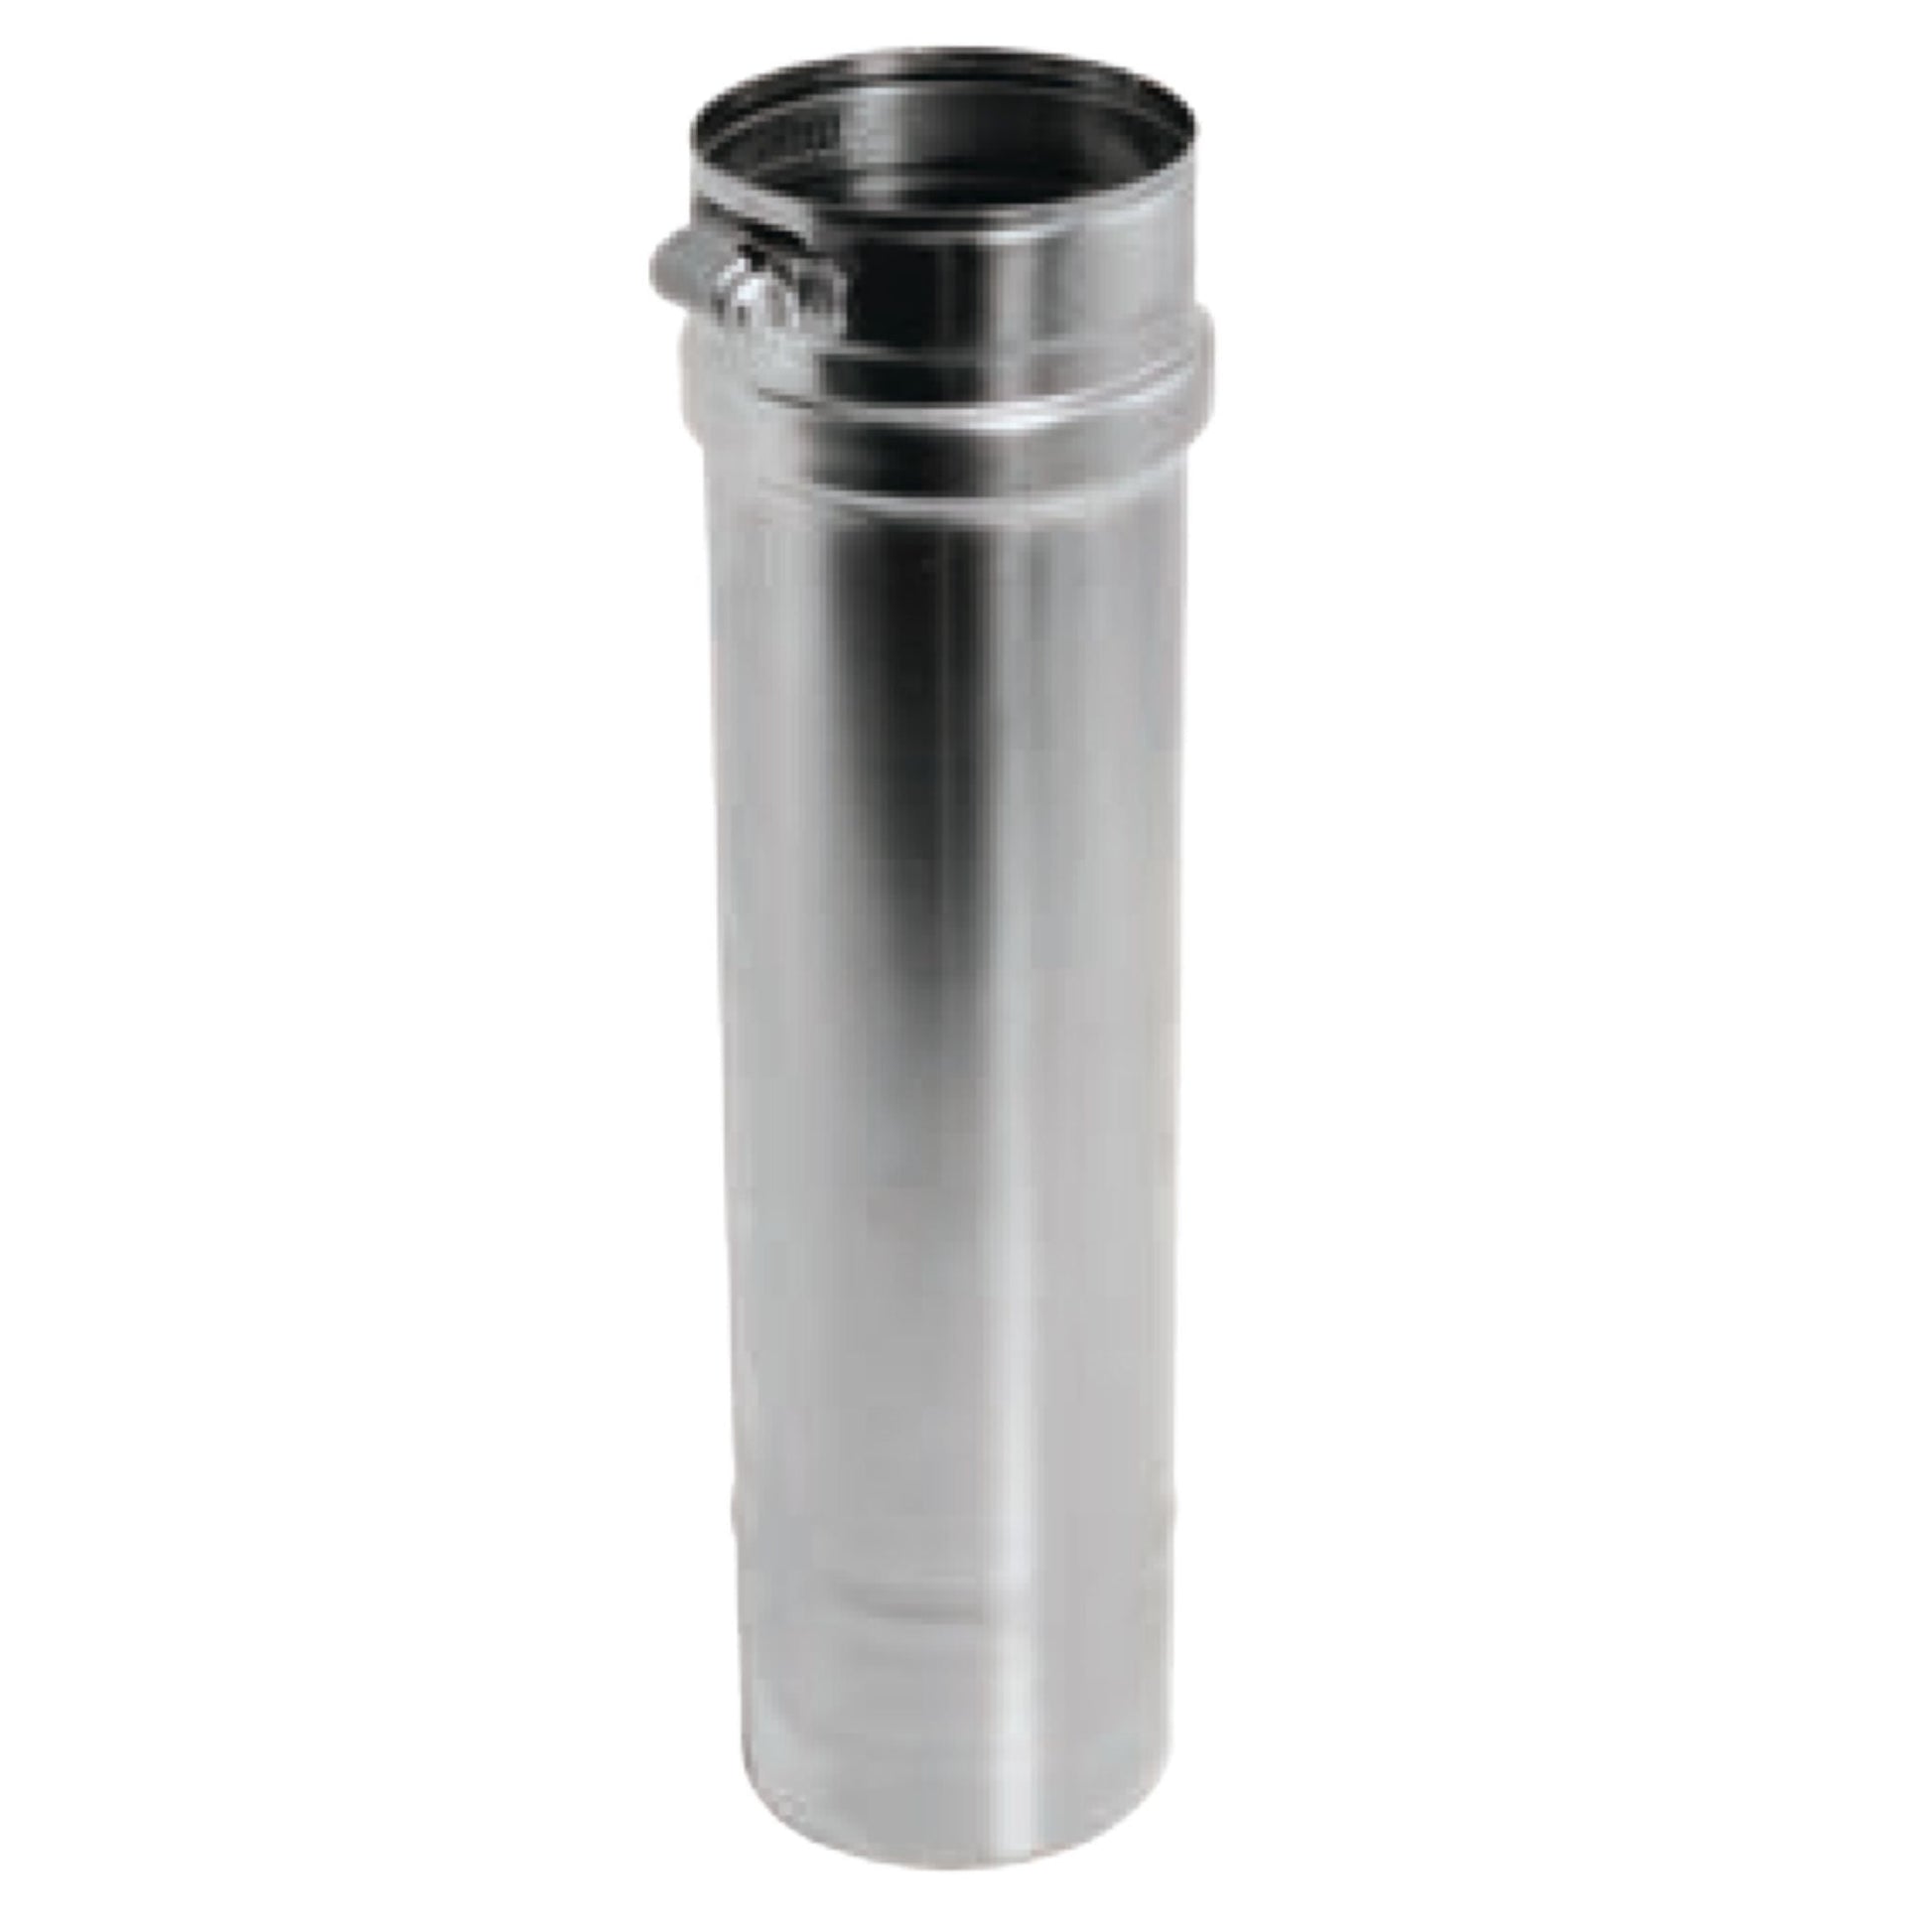 DuraVent FasNSeal 3" x 18" 29-4C Stainless Steel Vent Length